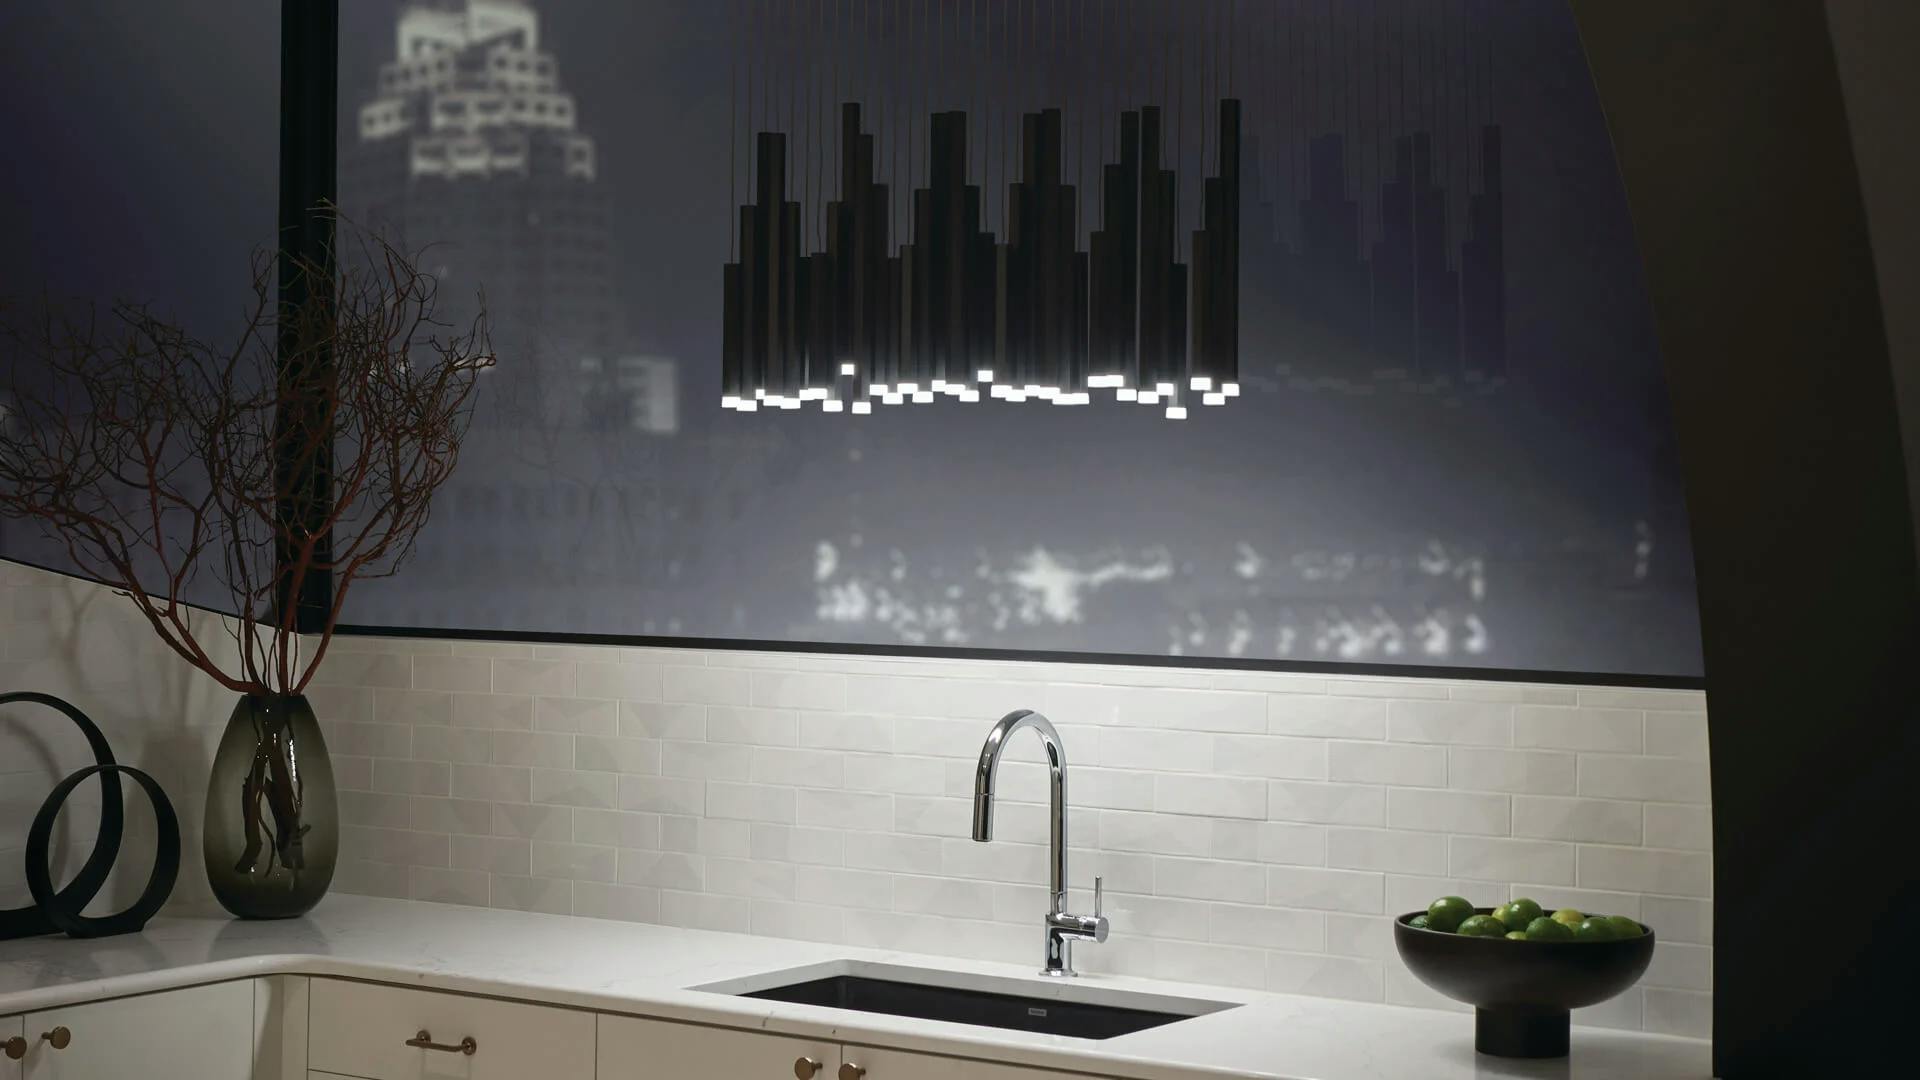 A high-rise kitchen at night featuring a cluster of soho pendants above a kitchen sink.